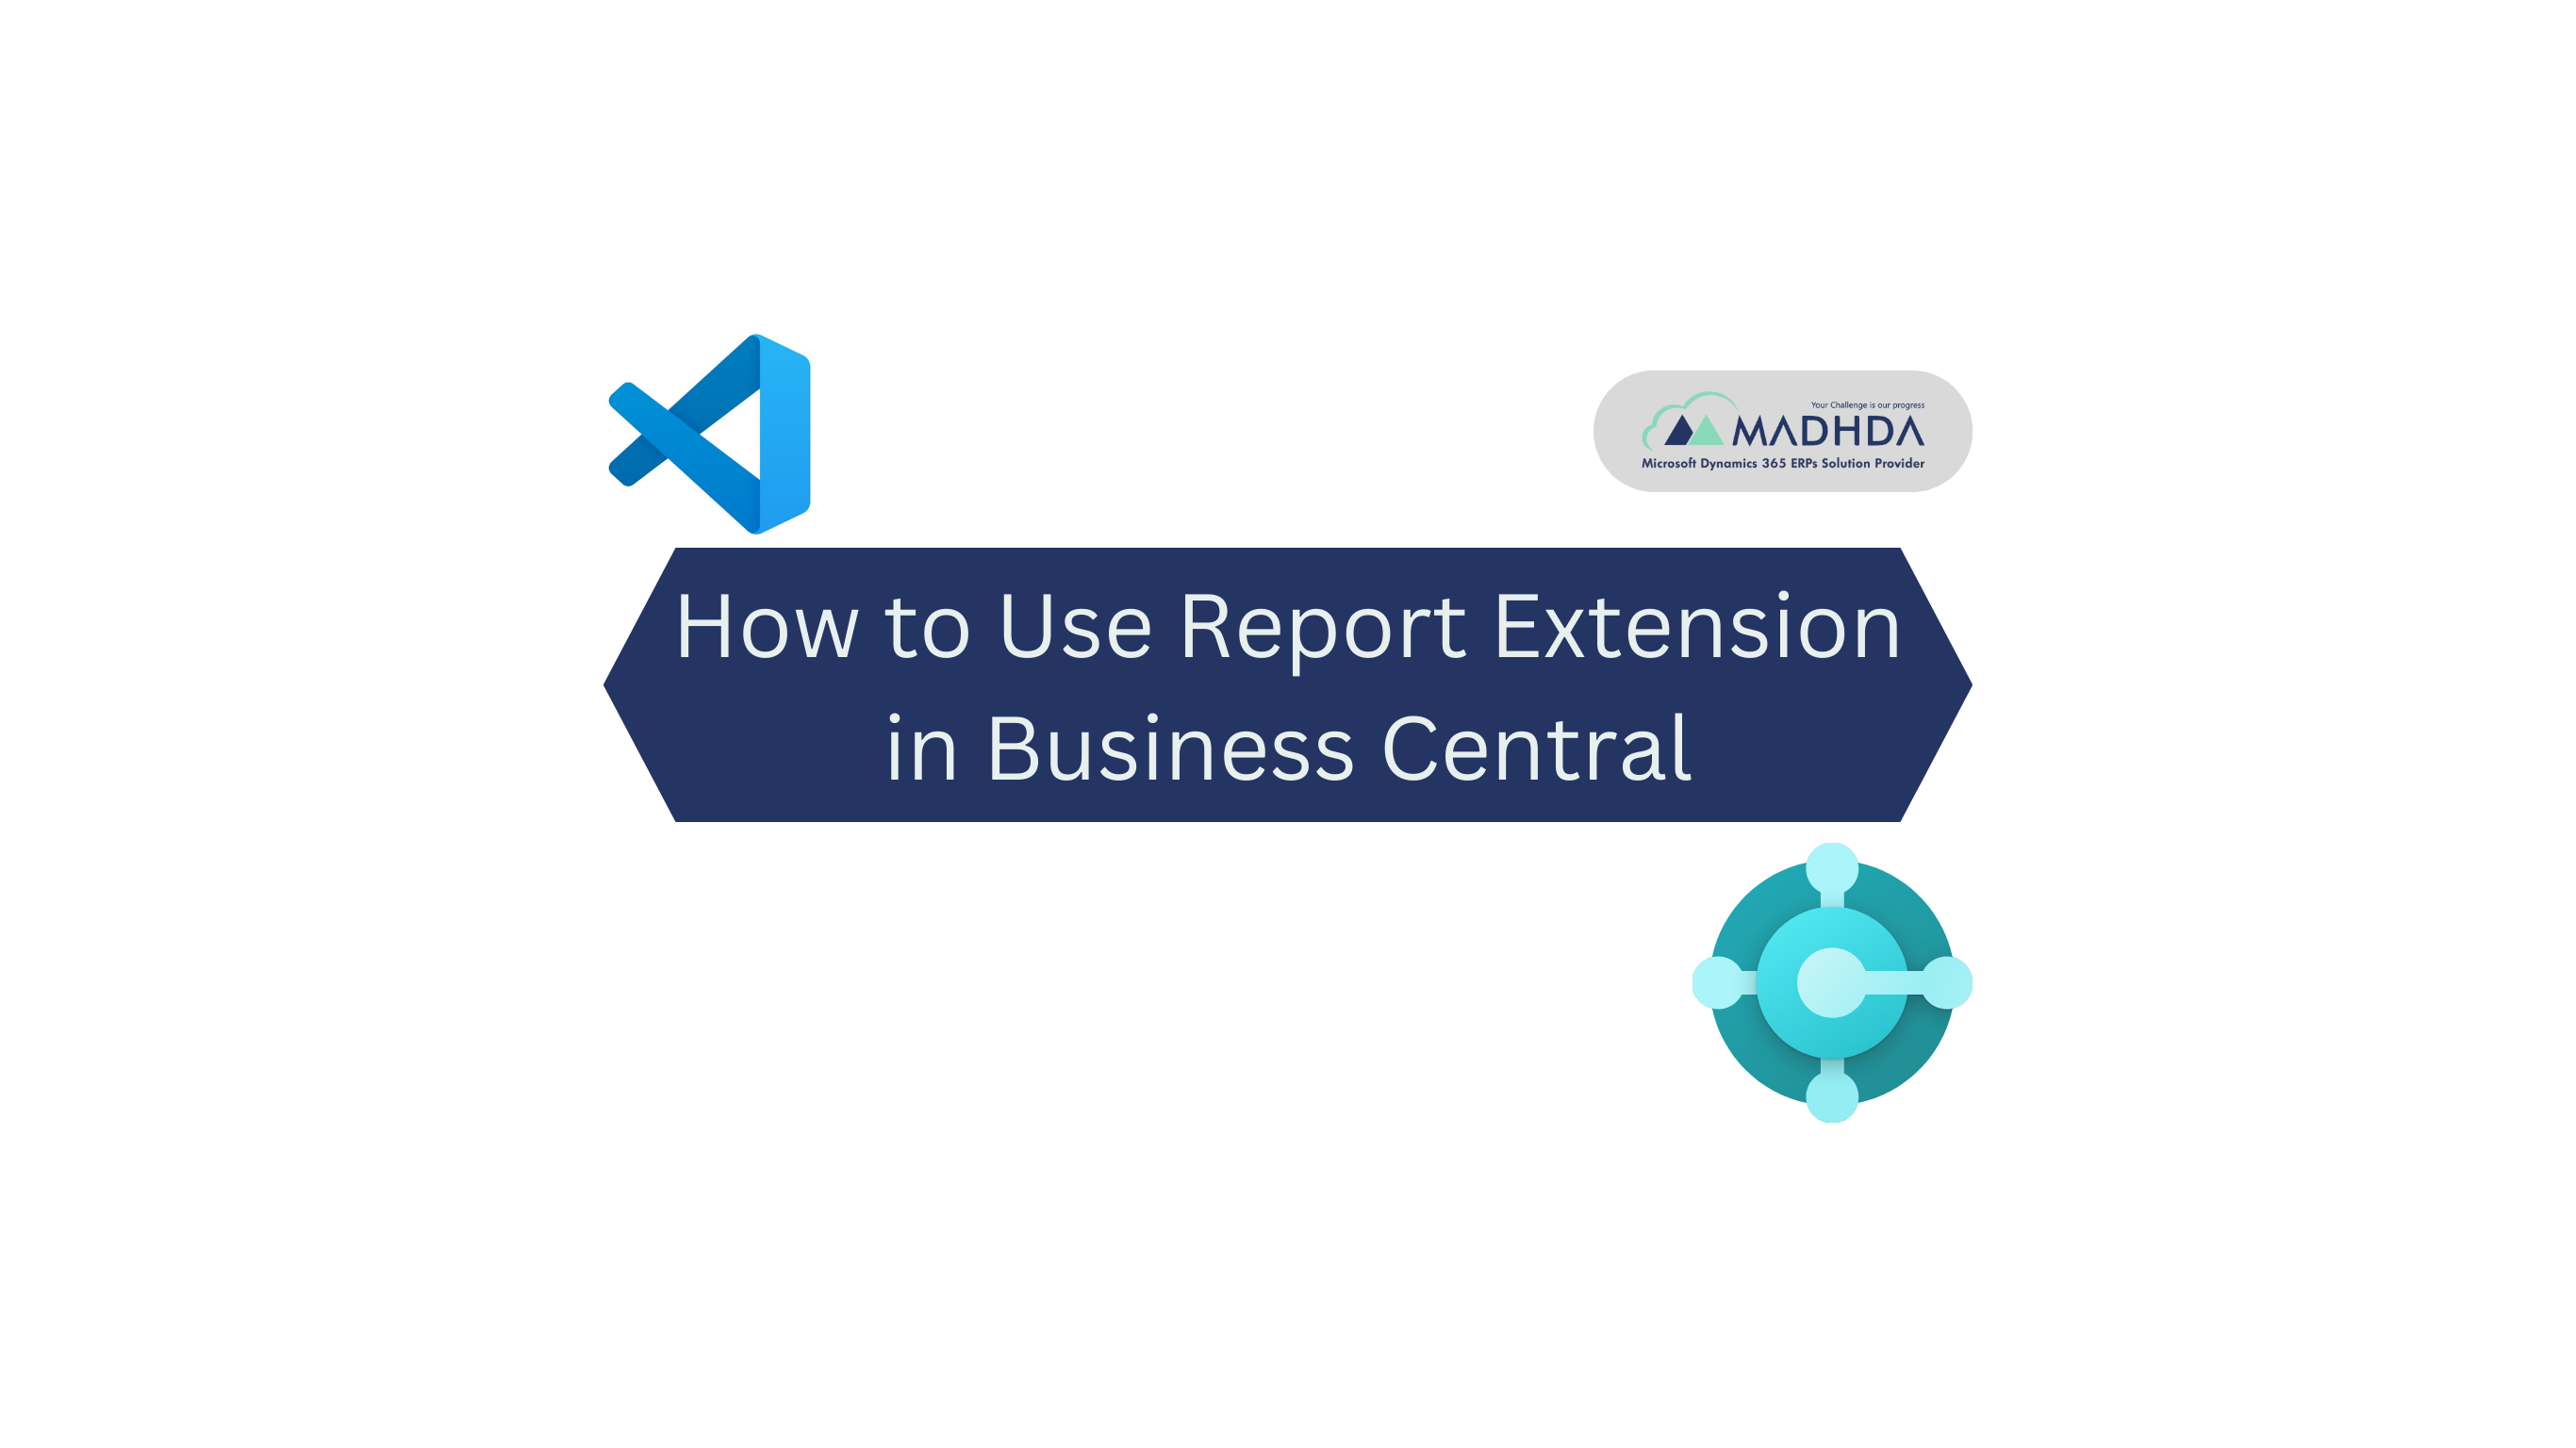 How to use Report Extension in Business Central?